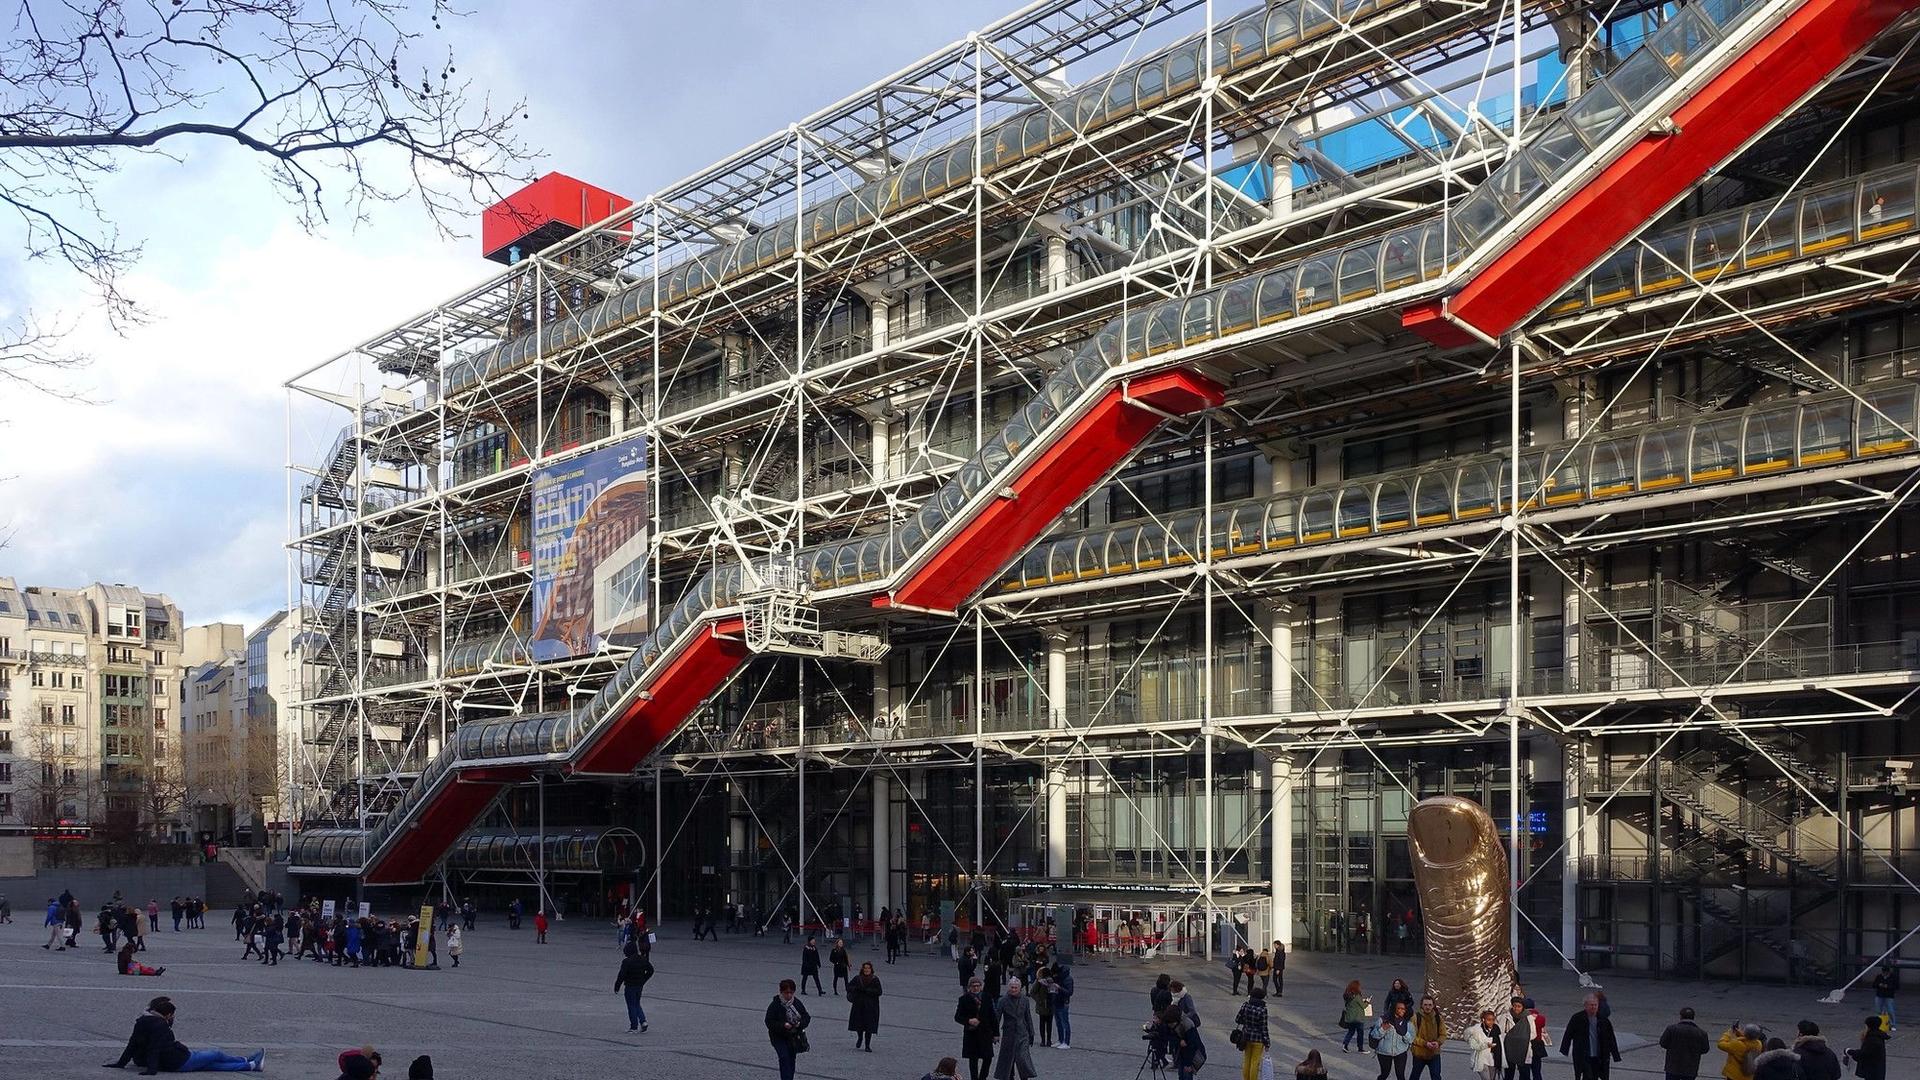 Refurbishment of the Centre Pompidou has already begun with the overhaul of the celebrated mechanical staircase on the facade and a proposed new entrance area Photo: Steven Zucker